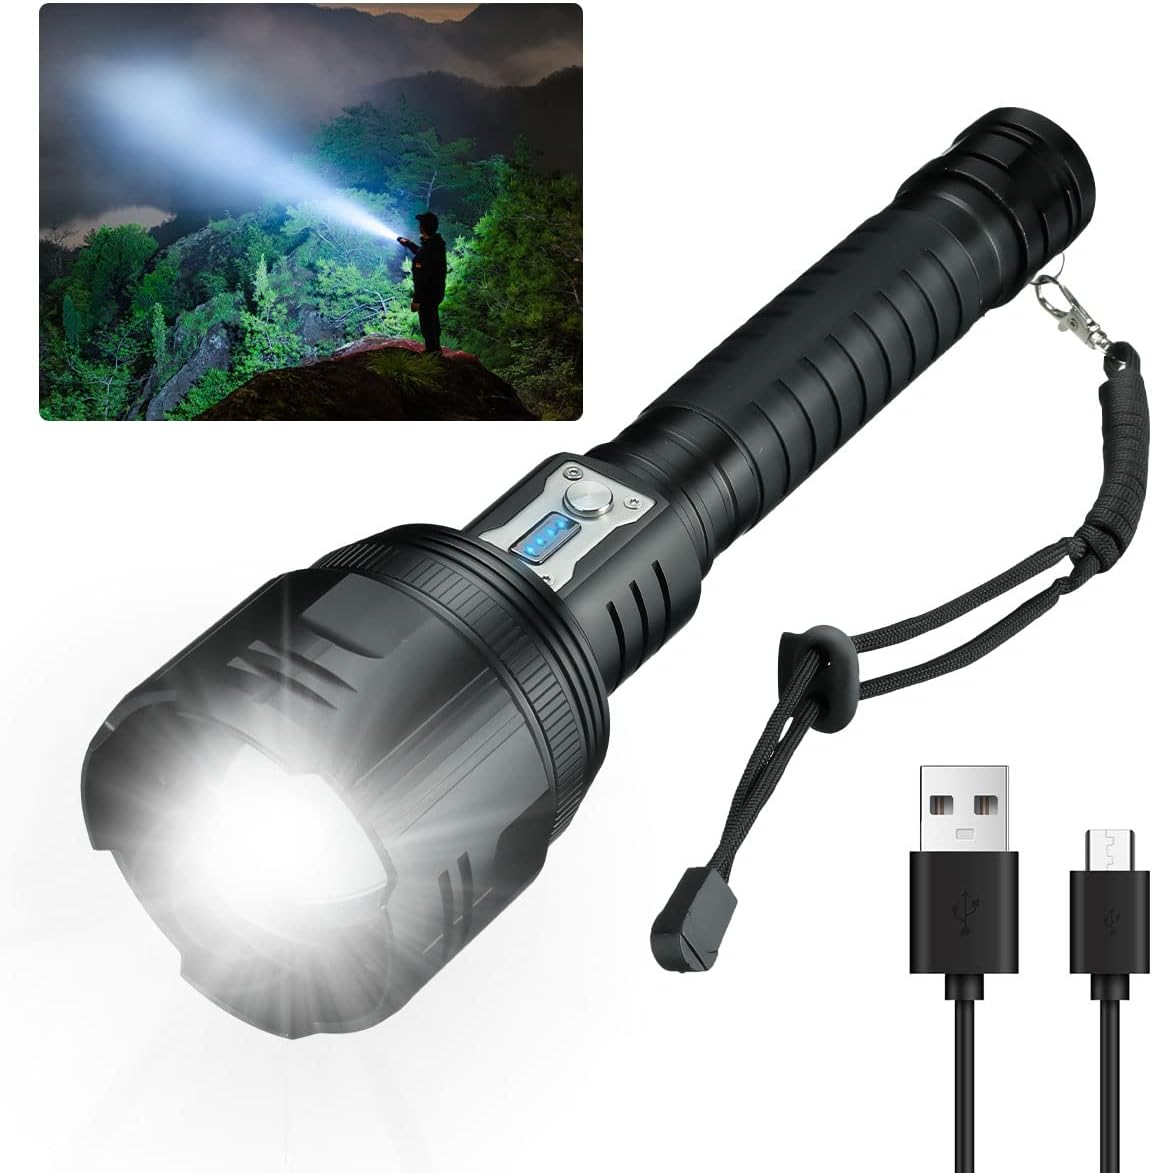 Super Bright Zoomable XHP360 Flashlight IPX7 6 Modes Tactical Flashlight for Camping Emergencies